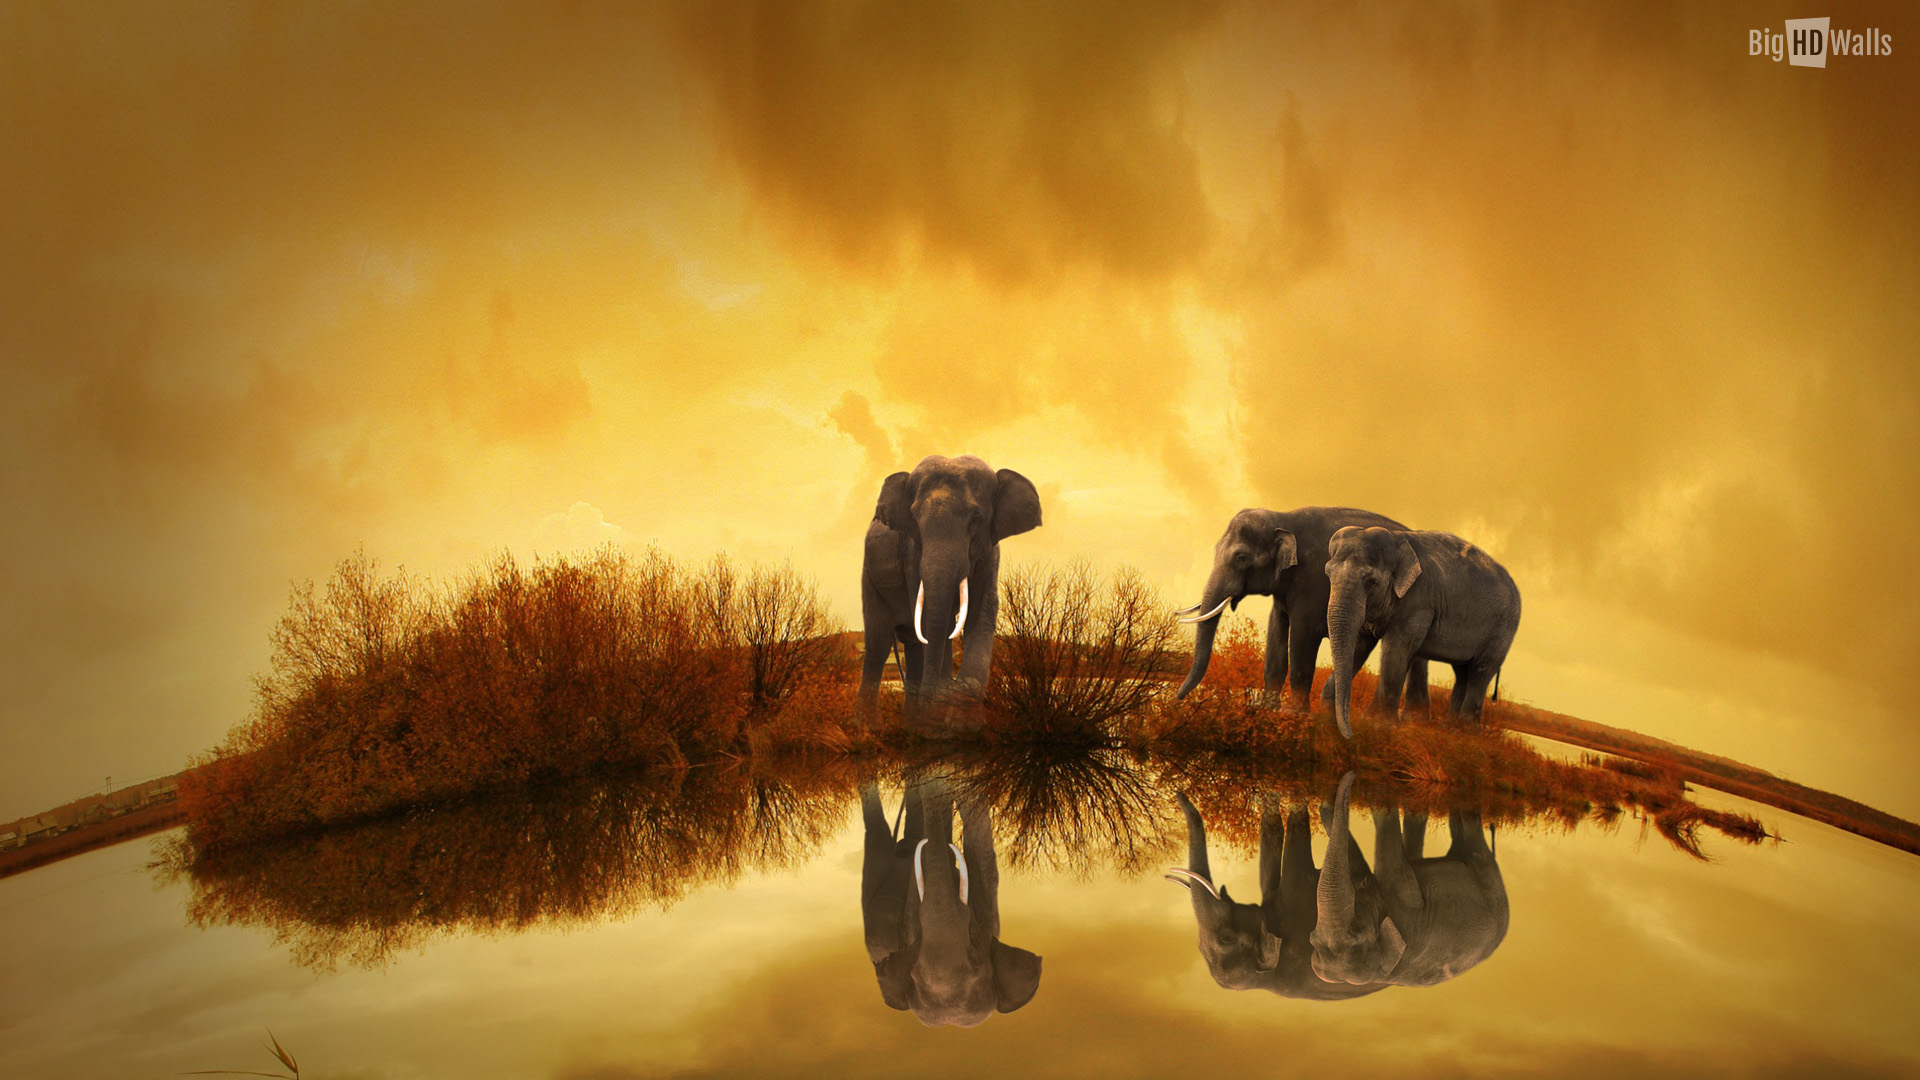 Mesmerizing Hd Wallpaper Of Elephants In Thailand Bighdwalls - Way We Choose To See The World Creates The World We , HD Wallpaper & Backgrounds